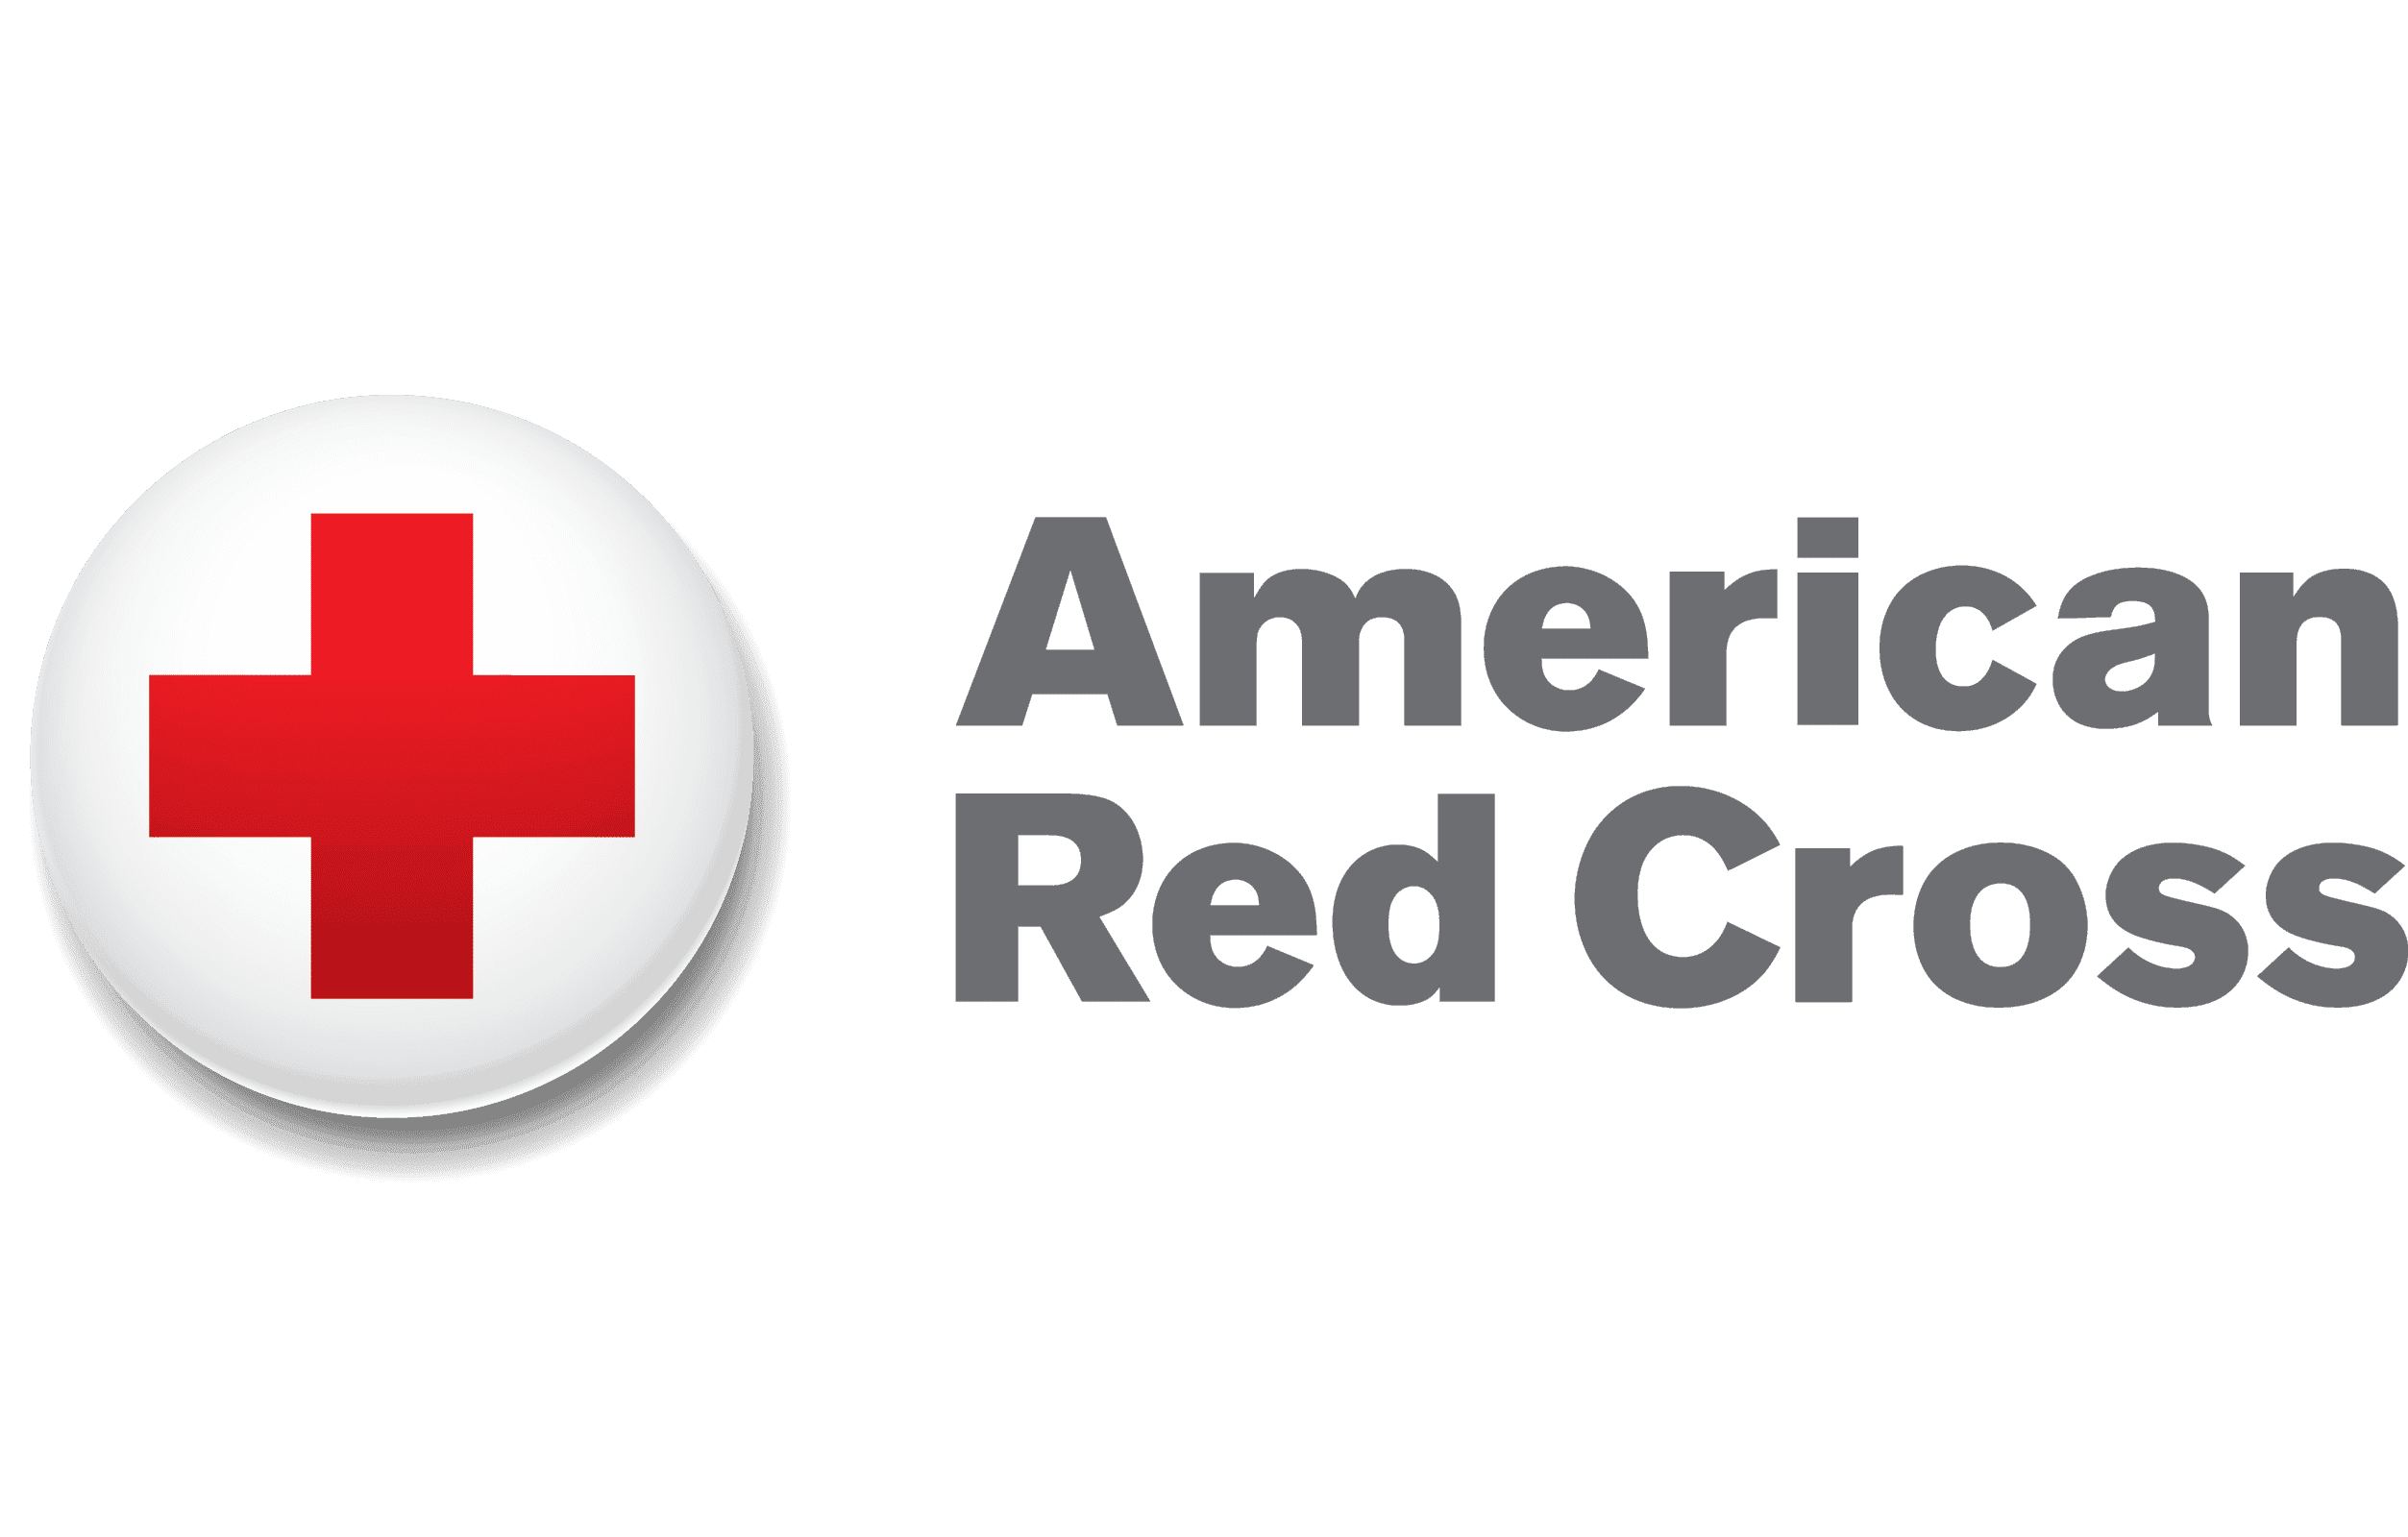 Local Red Cross Chapter Taking Over 200 Volunteers To Kentucky To Provide Humanitarian Flood Relief